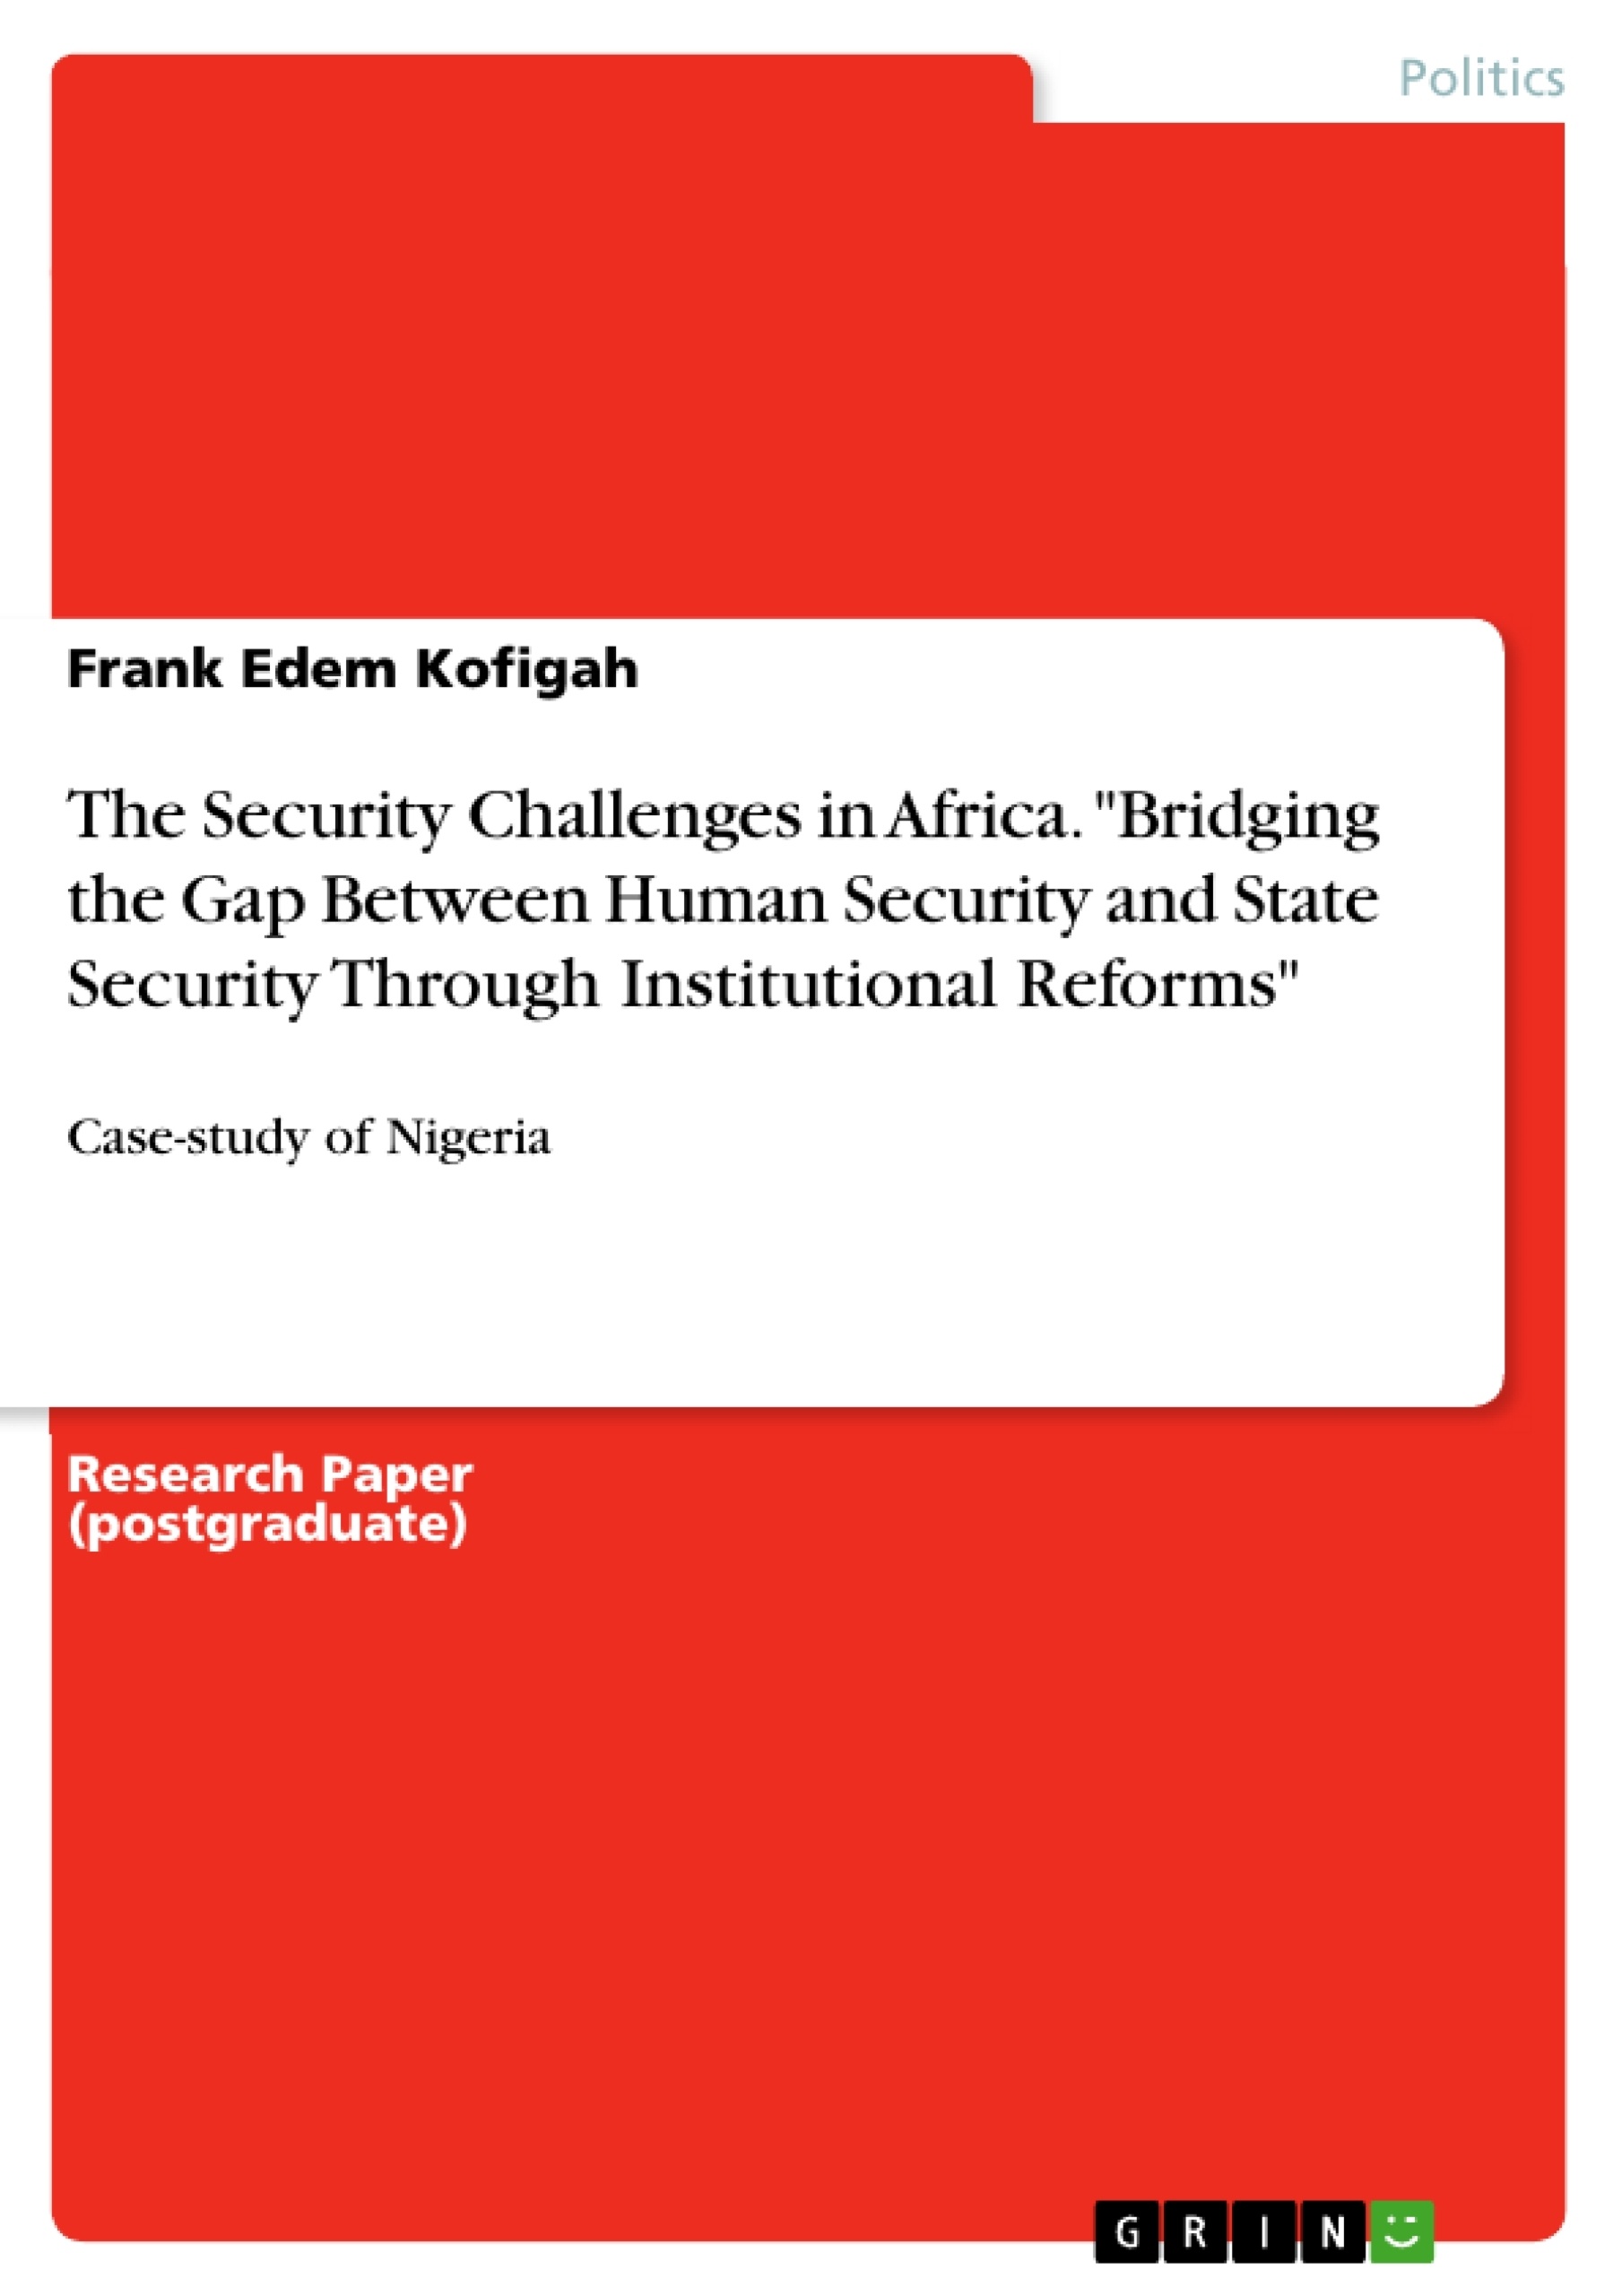 Title: The Security Challenges in Africa. "Bridging the Gap Between Human Security and State Security Through Institutional Reforms"